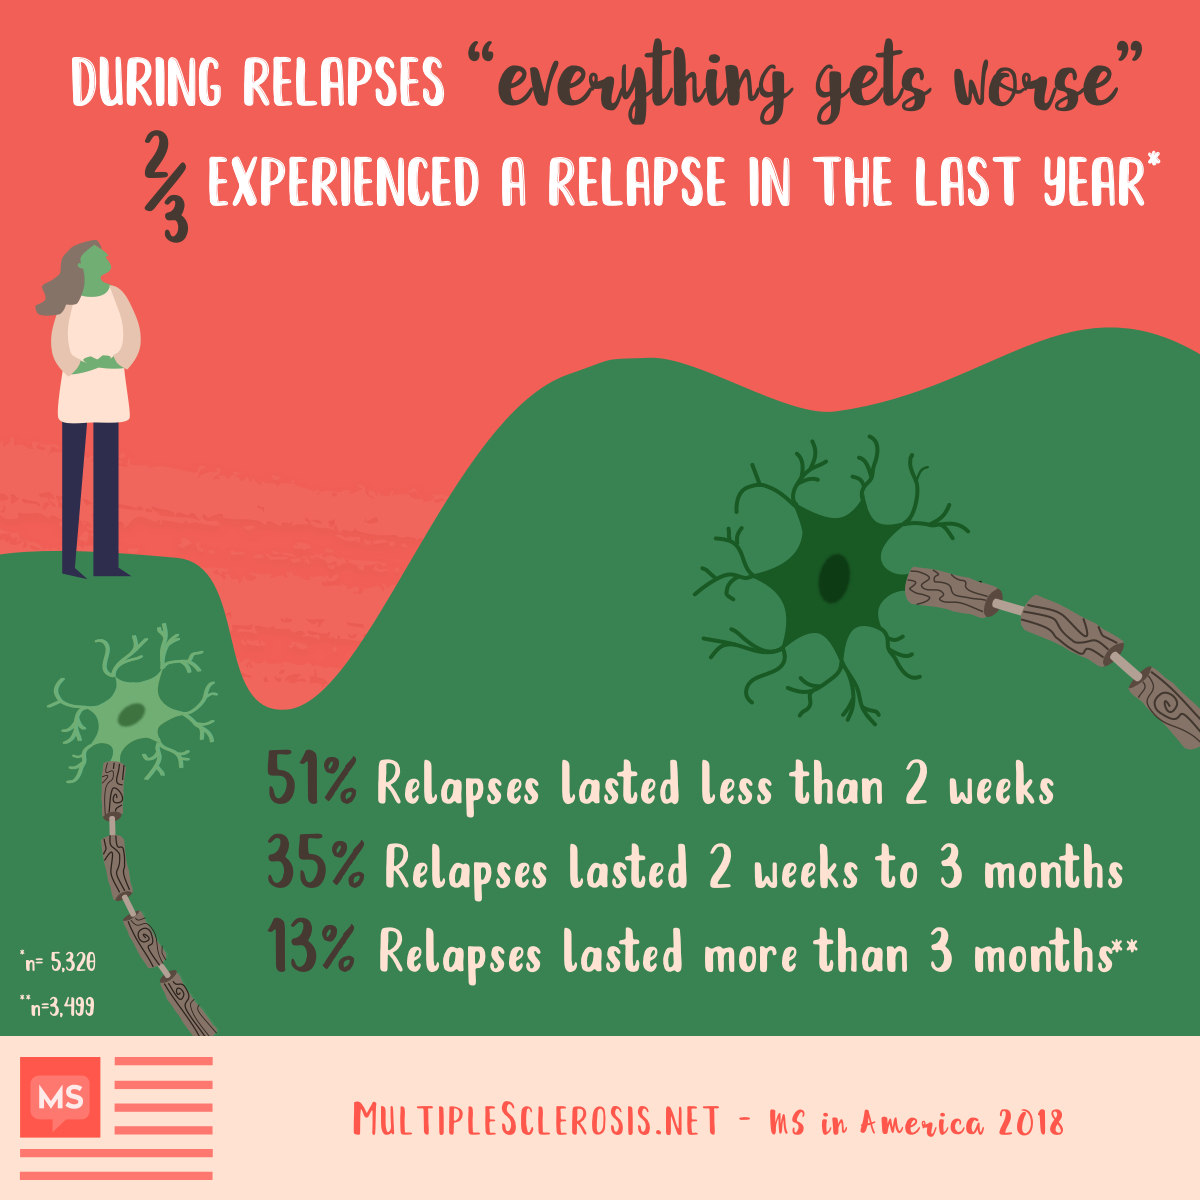 During relapses, “everything gets worse. 2/3 experienced a relapse in the last year. For 51%, relapses lasted less than 2 weeks, for 35% relapses lasted 2 weeks to 3 months, for 13% relapses lasted more than 3 months